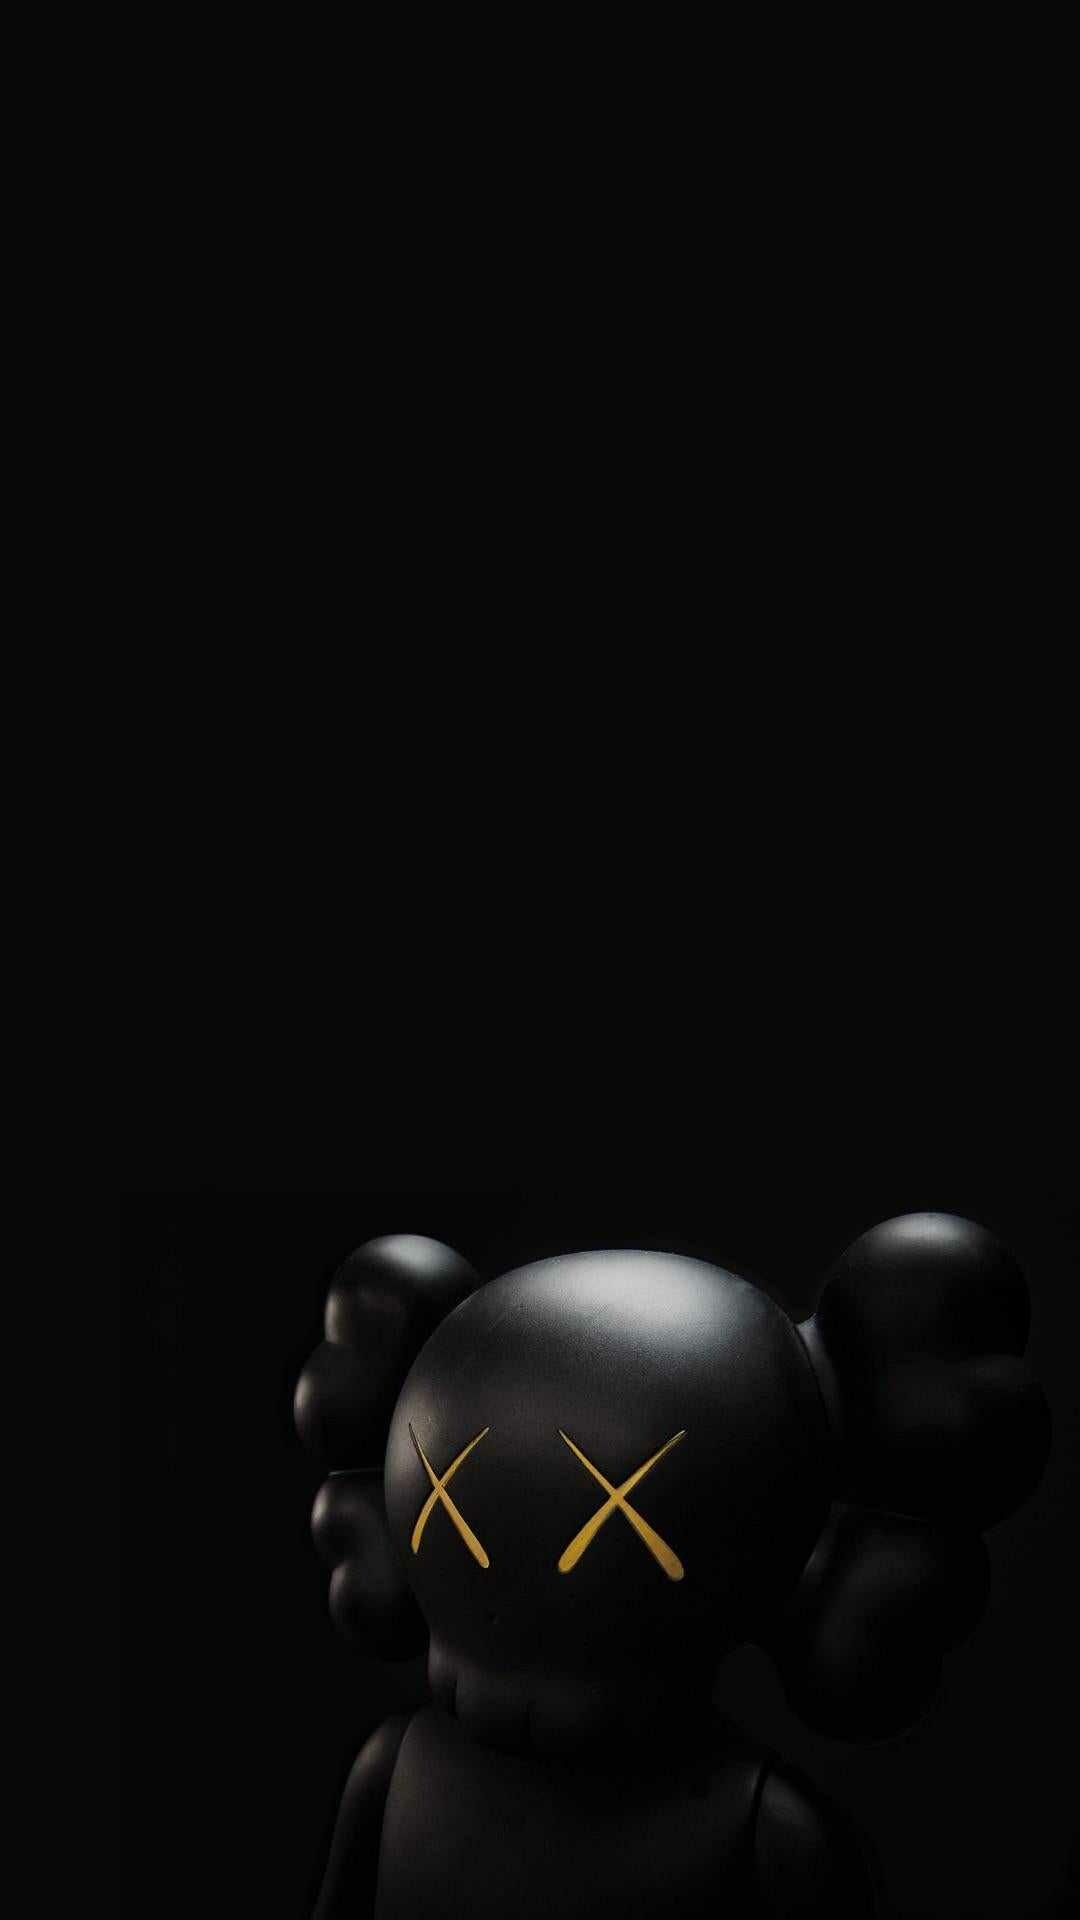 KAWS: Has collaborated with brands such as Disney, Marc Jacobs, and Comme des Garçons. 1080x1920 Full HD Background.